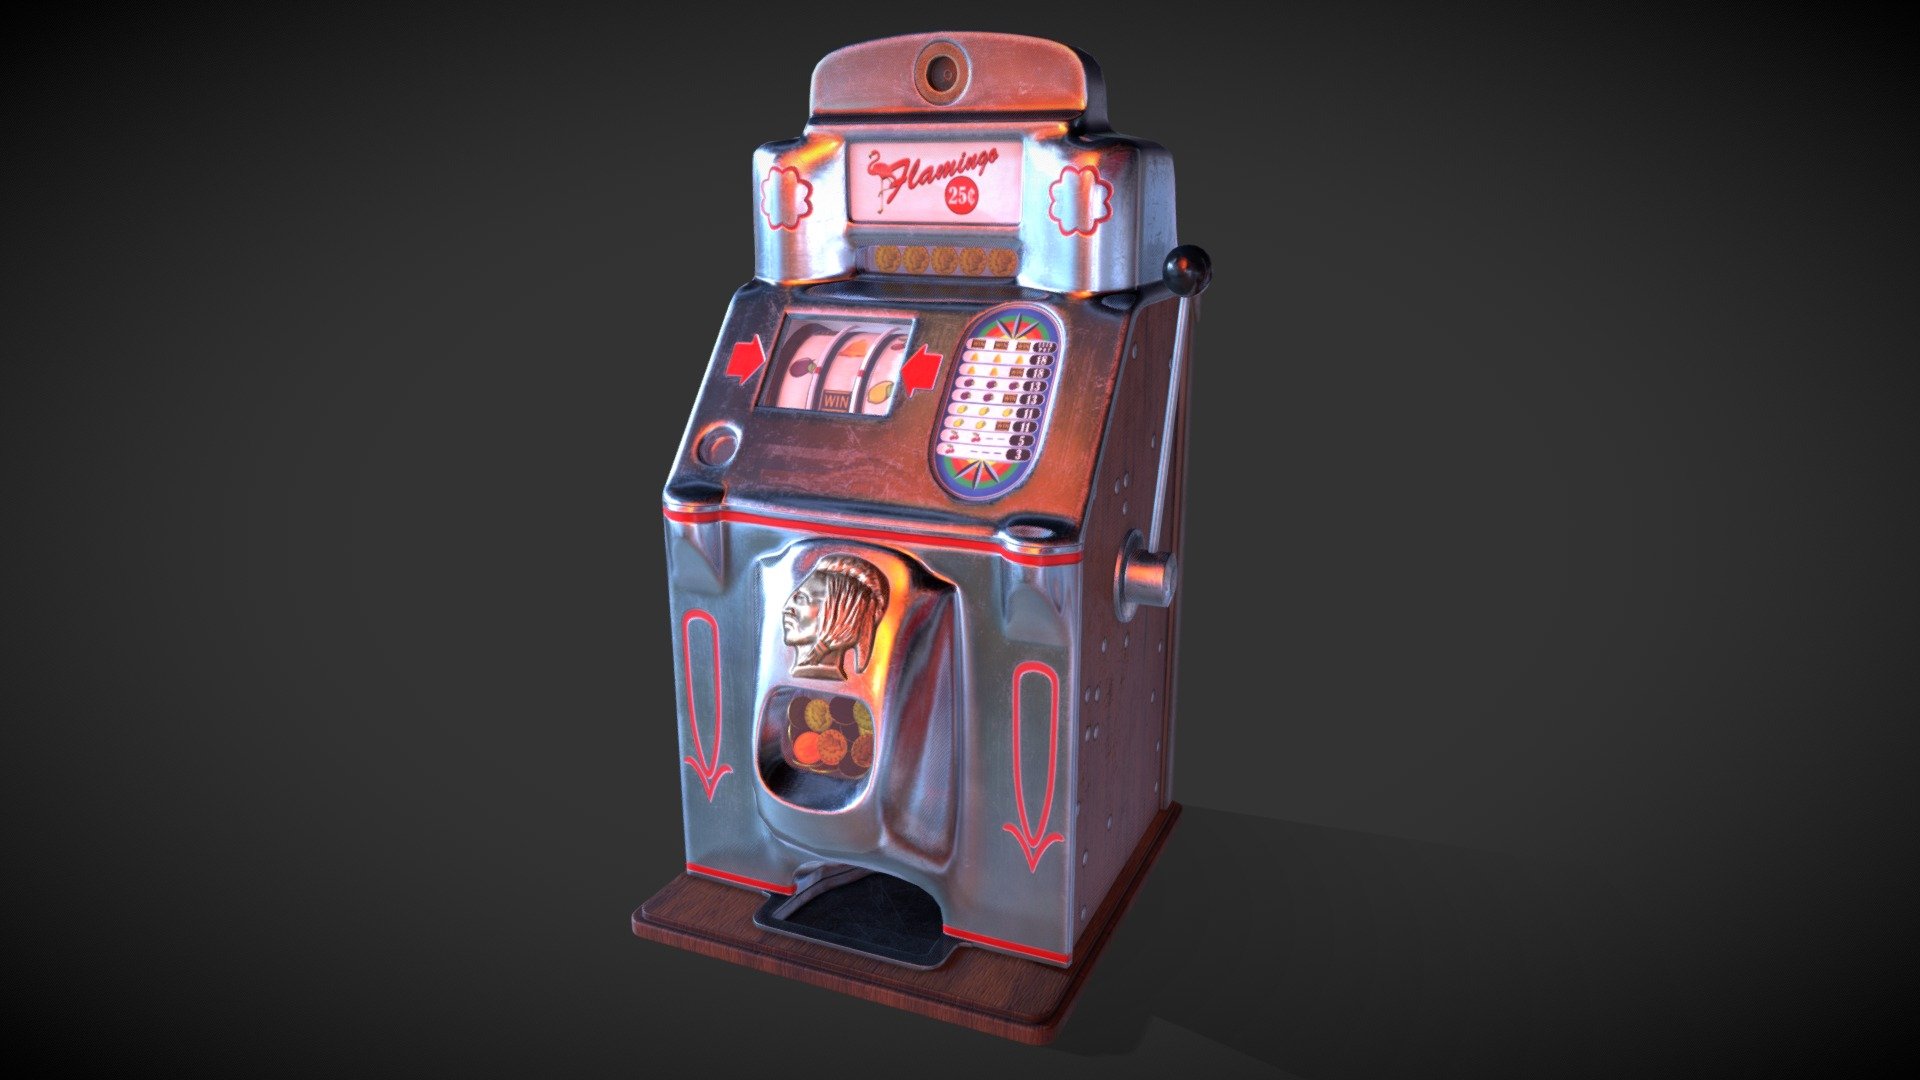 I was impressed by the design of this retro slot machine, so decided to make this model as training project.
It uses one 2k texture set 3d model